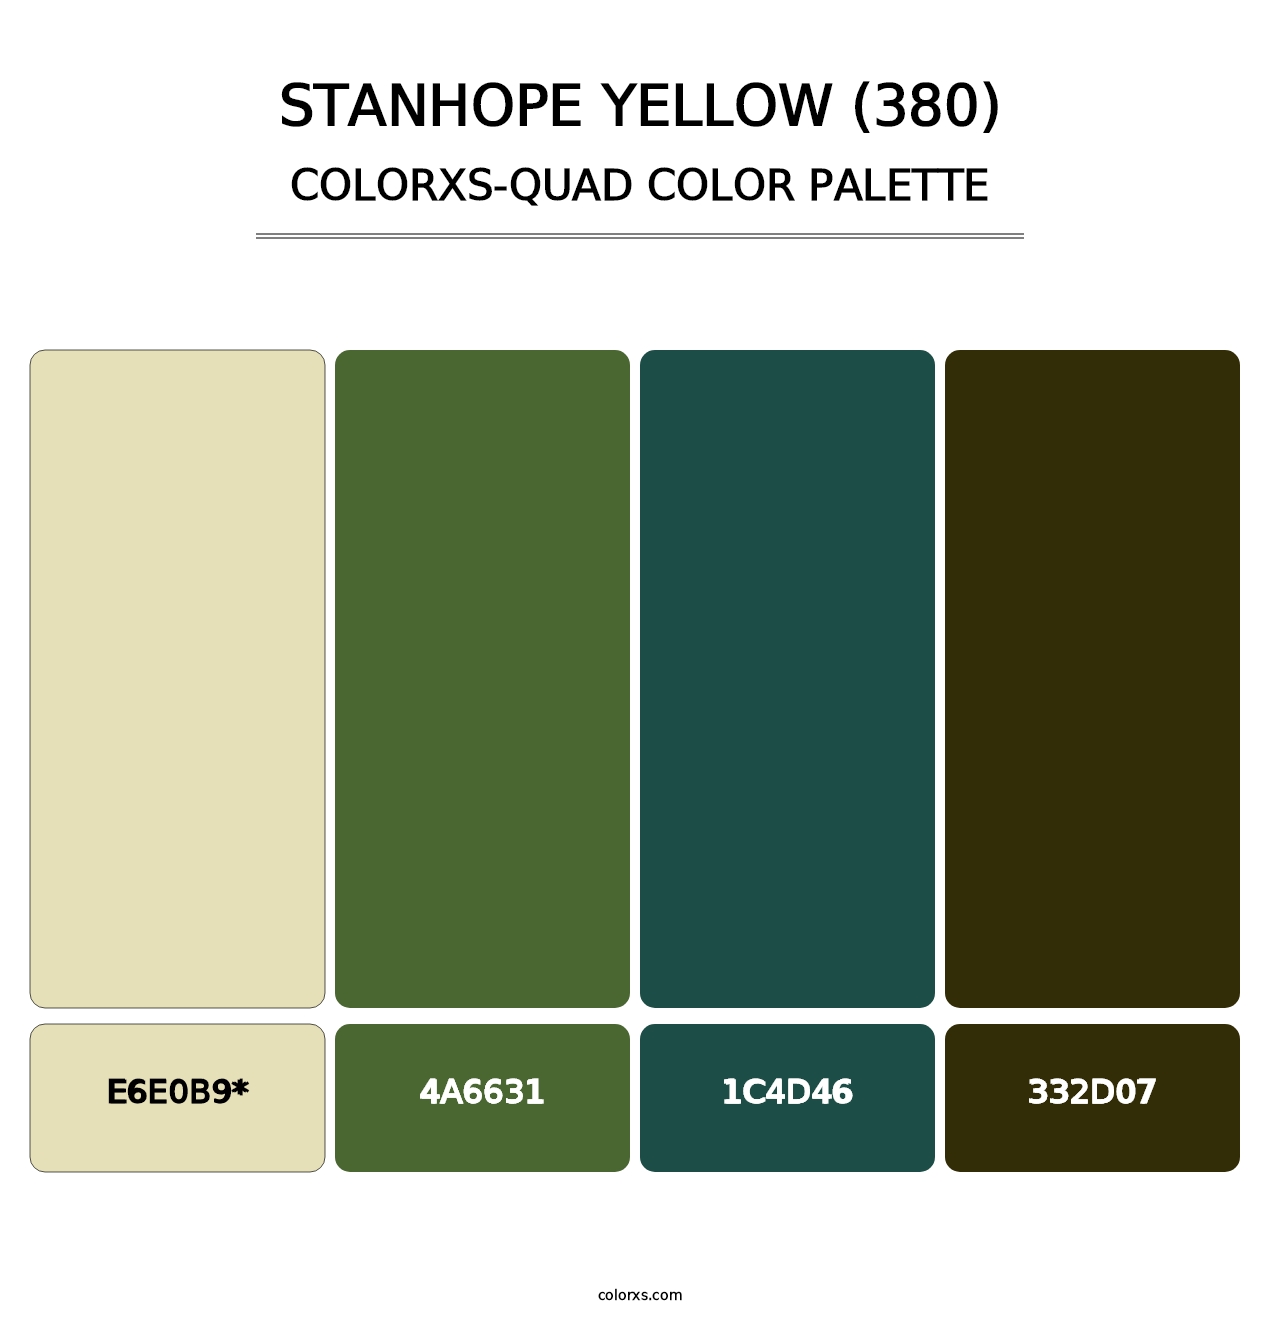 Stanhope Yellow (380) - Colorxs Quad Palette